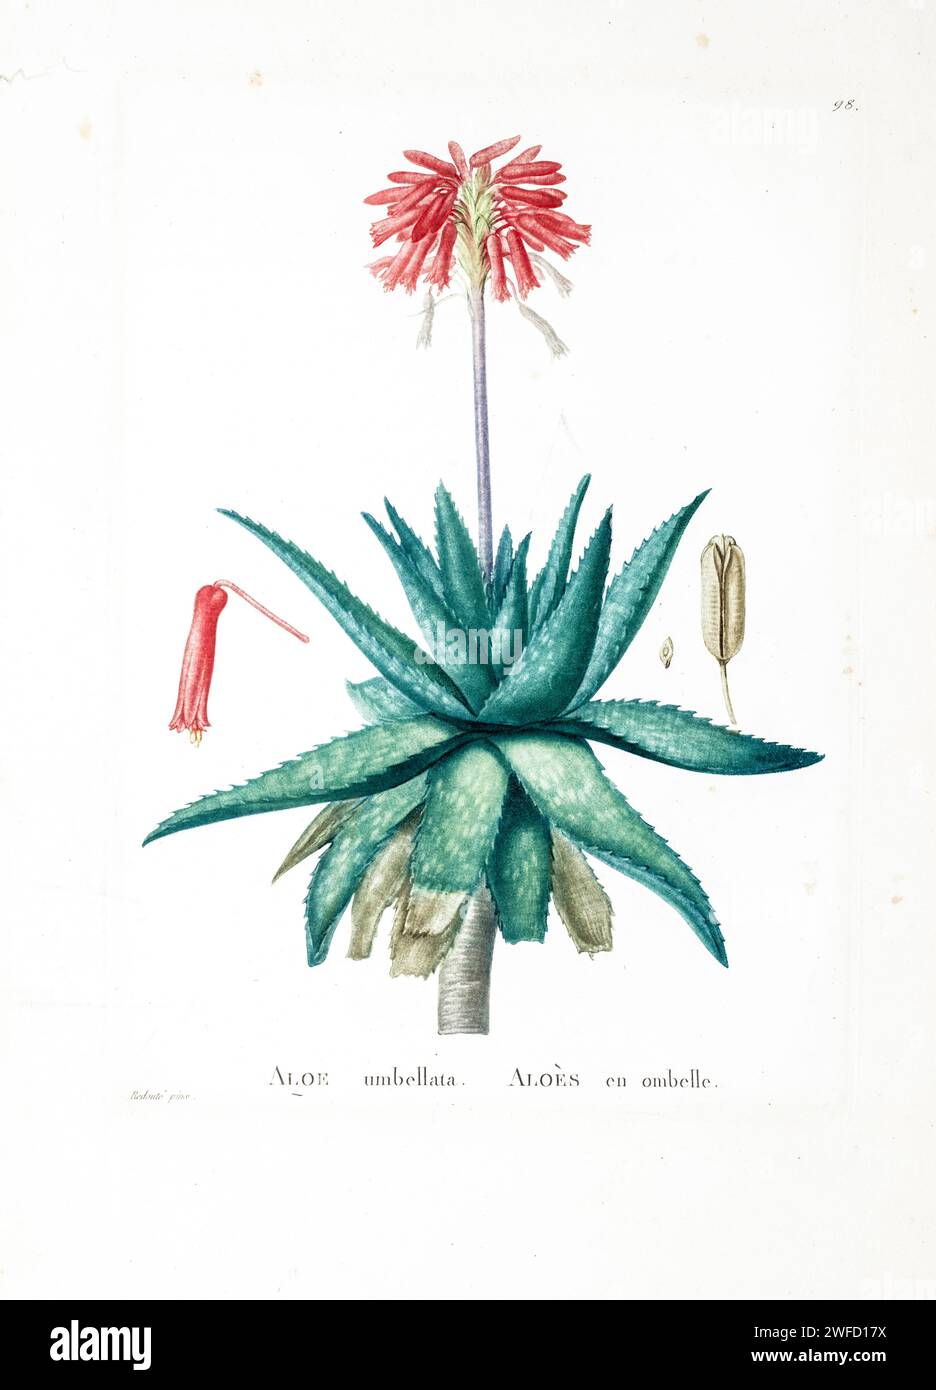 Aloe saponaria (Ait.) Haw. Here As Aloe umbellata from History of Succulent Plants [Plantarum historia succulentarum / Histoire des plantes grasses] painted by Pierre-Joseph Redouté and described by Augustin Pyramus de Candolle 1799 Aloe maculata, the soap aloe or zebra aloe, is a Southern African species of aloe. Local people in South Africa know it informally as the Bontaalwyn in Afrikaans, or lekhala in the Sesotho language. Stock Photo